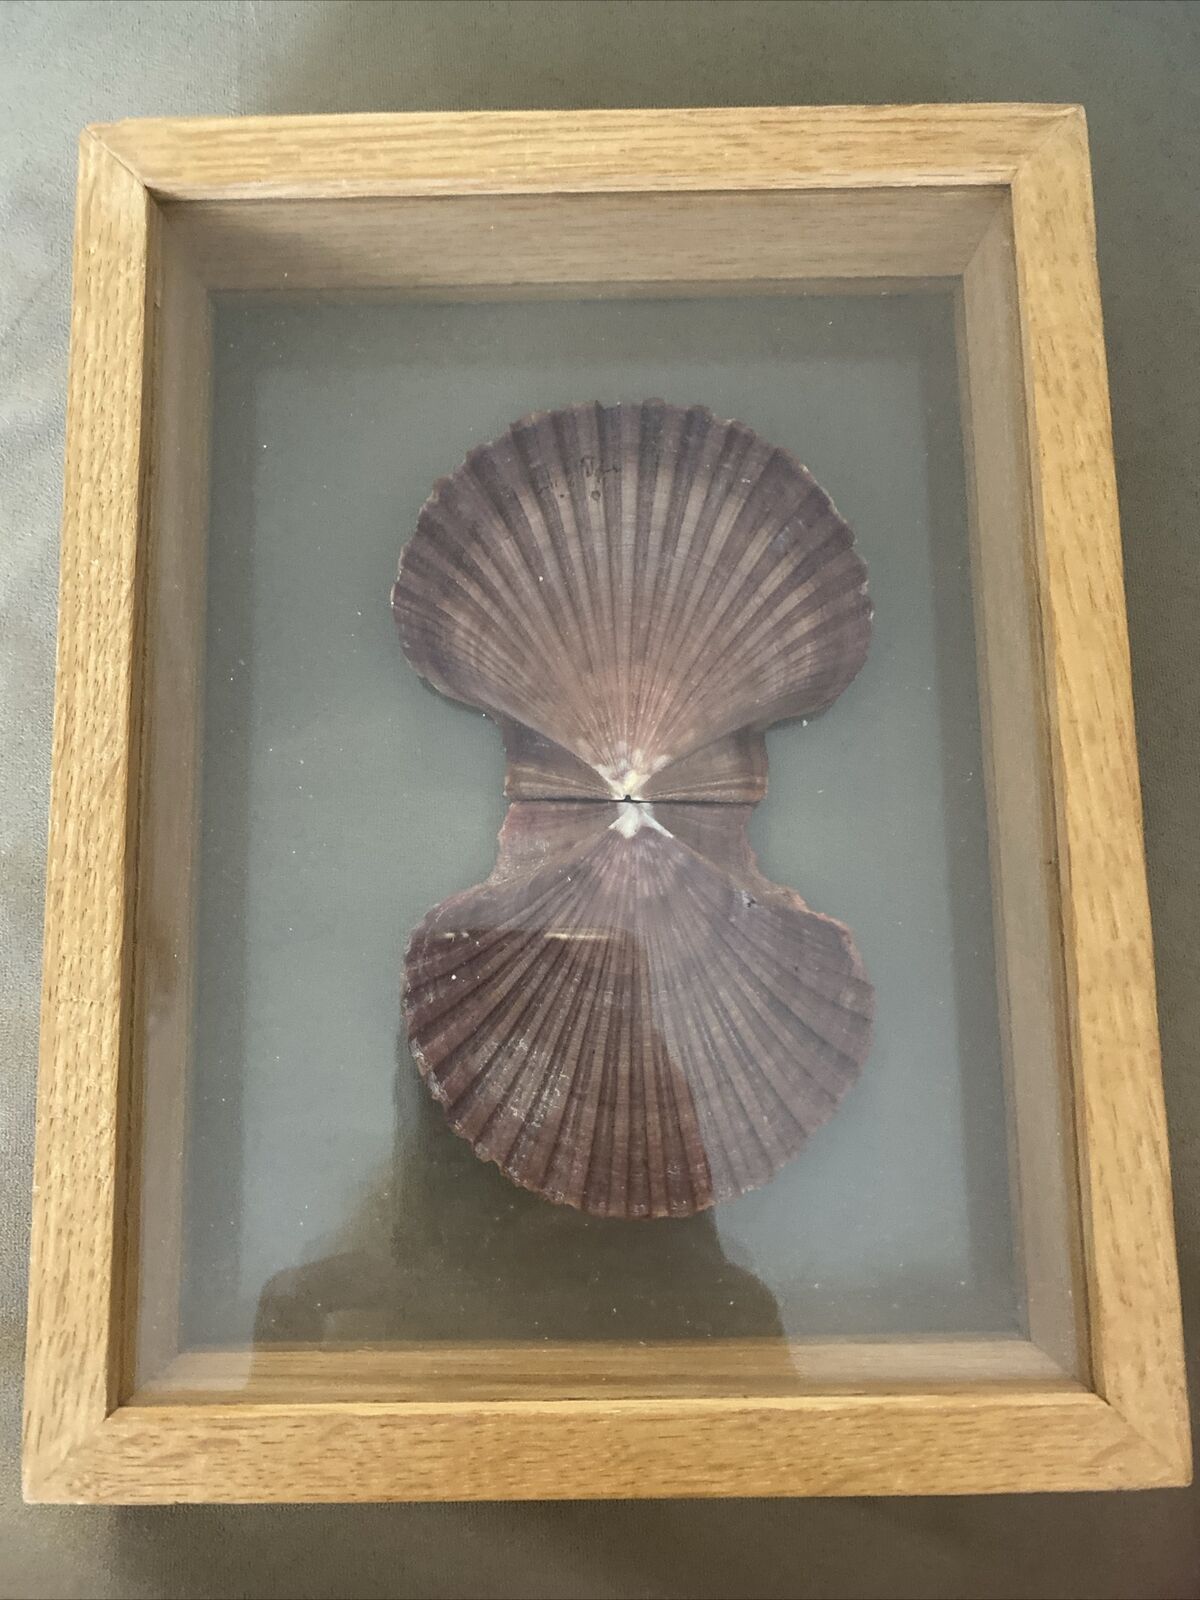 1 DOUBLE PANE GLASS FRAMED ART WITH SHELLS